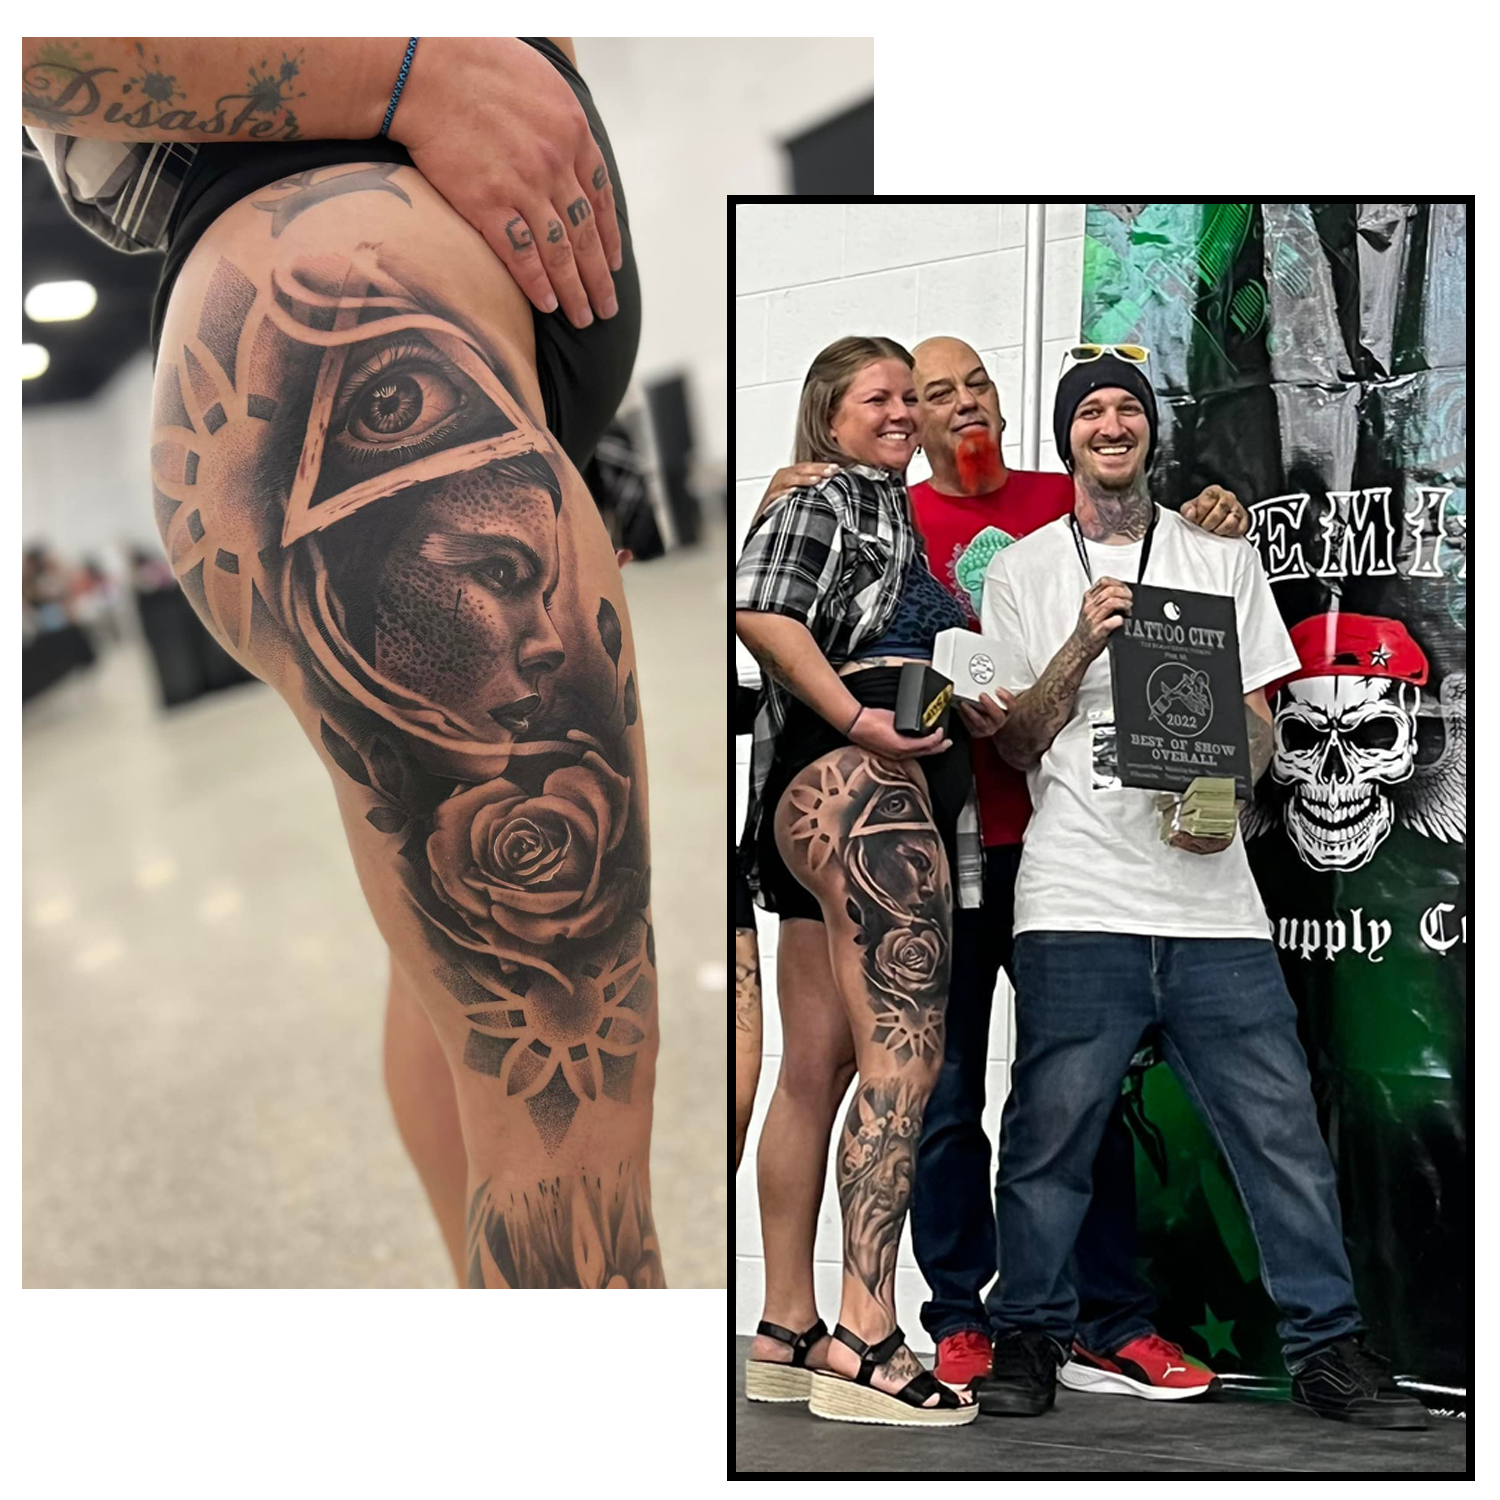 About Hell City  Hell City Tattoo Fest